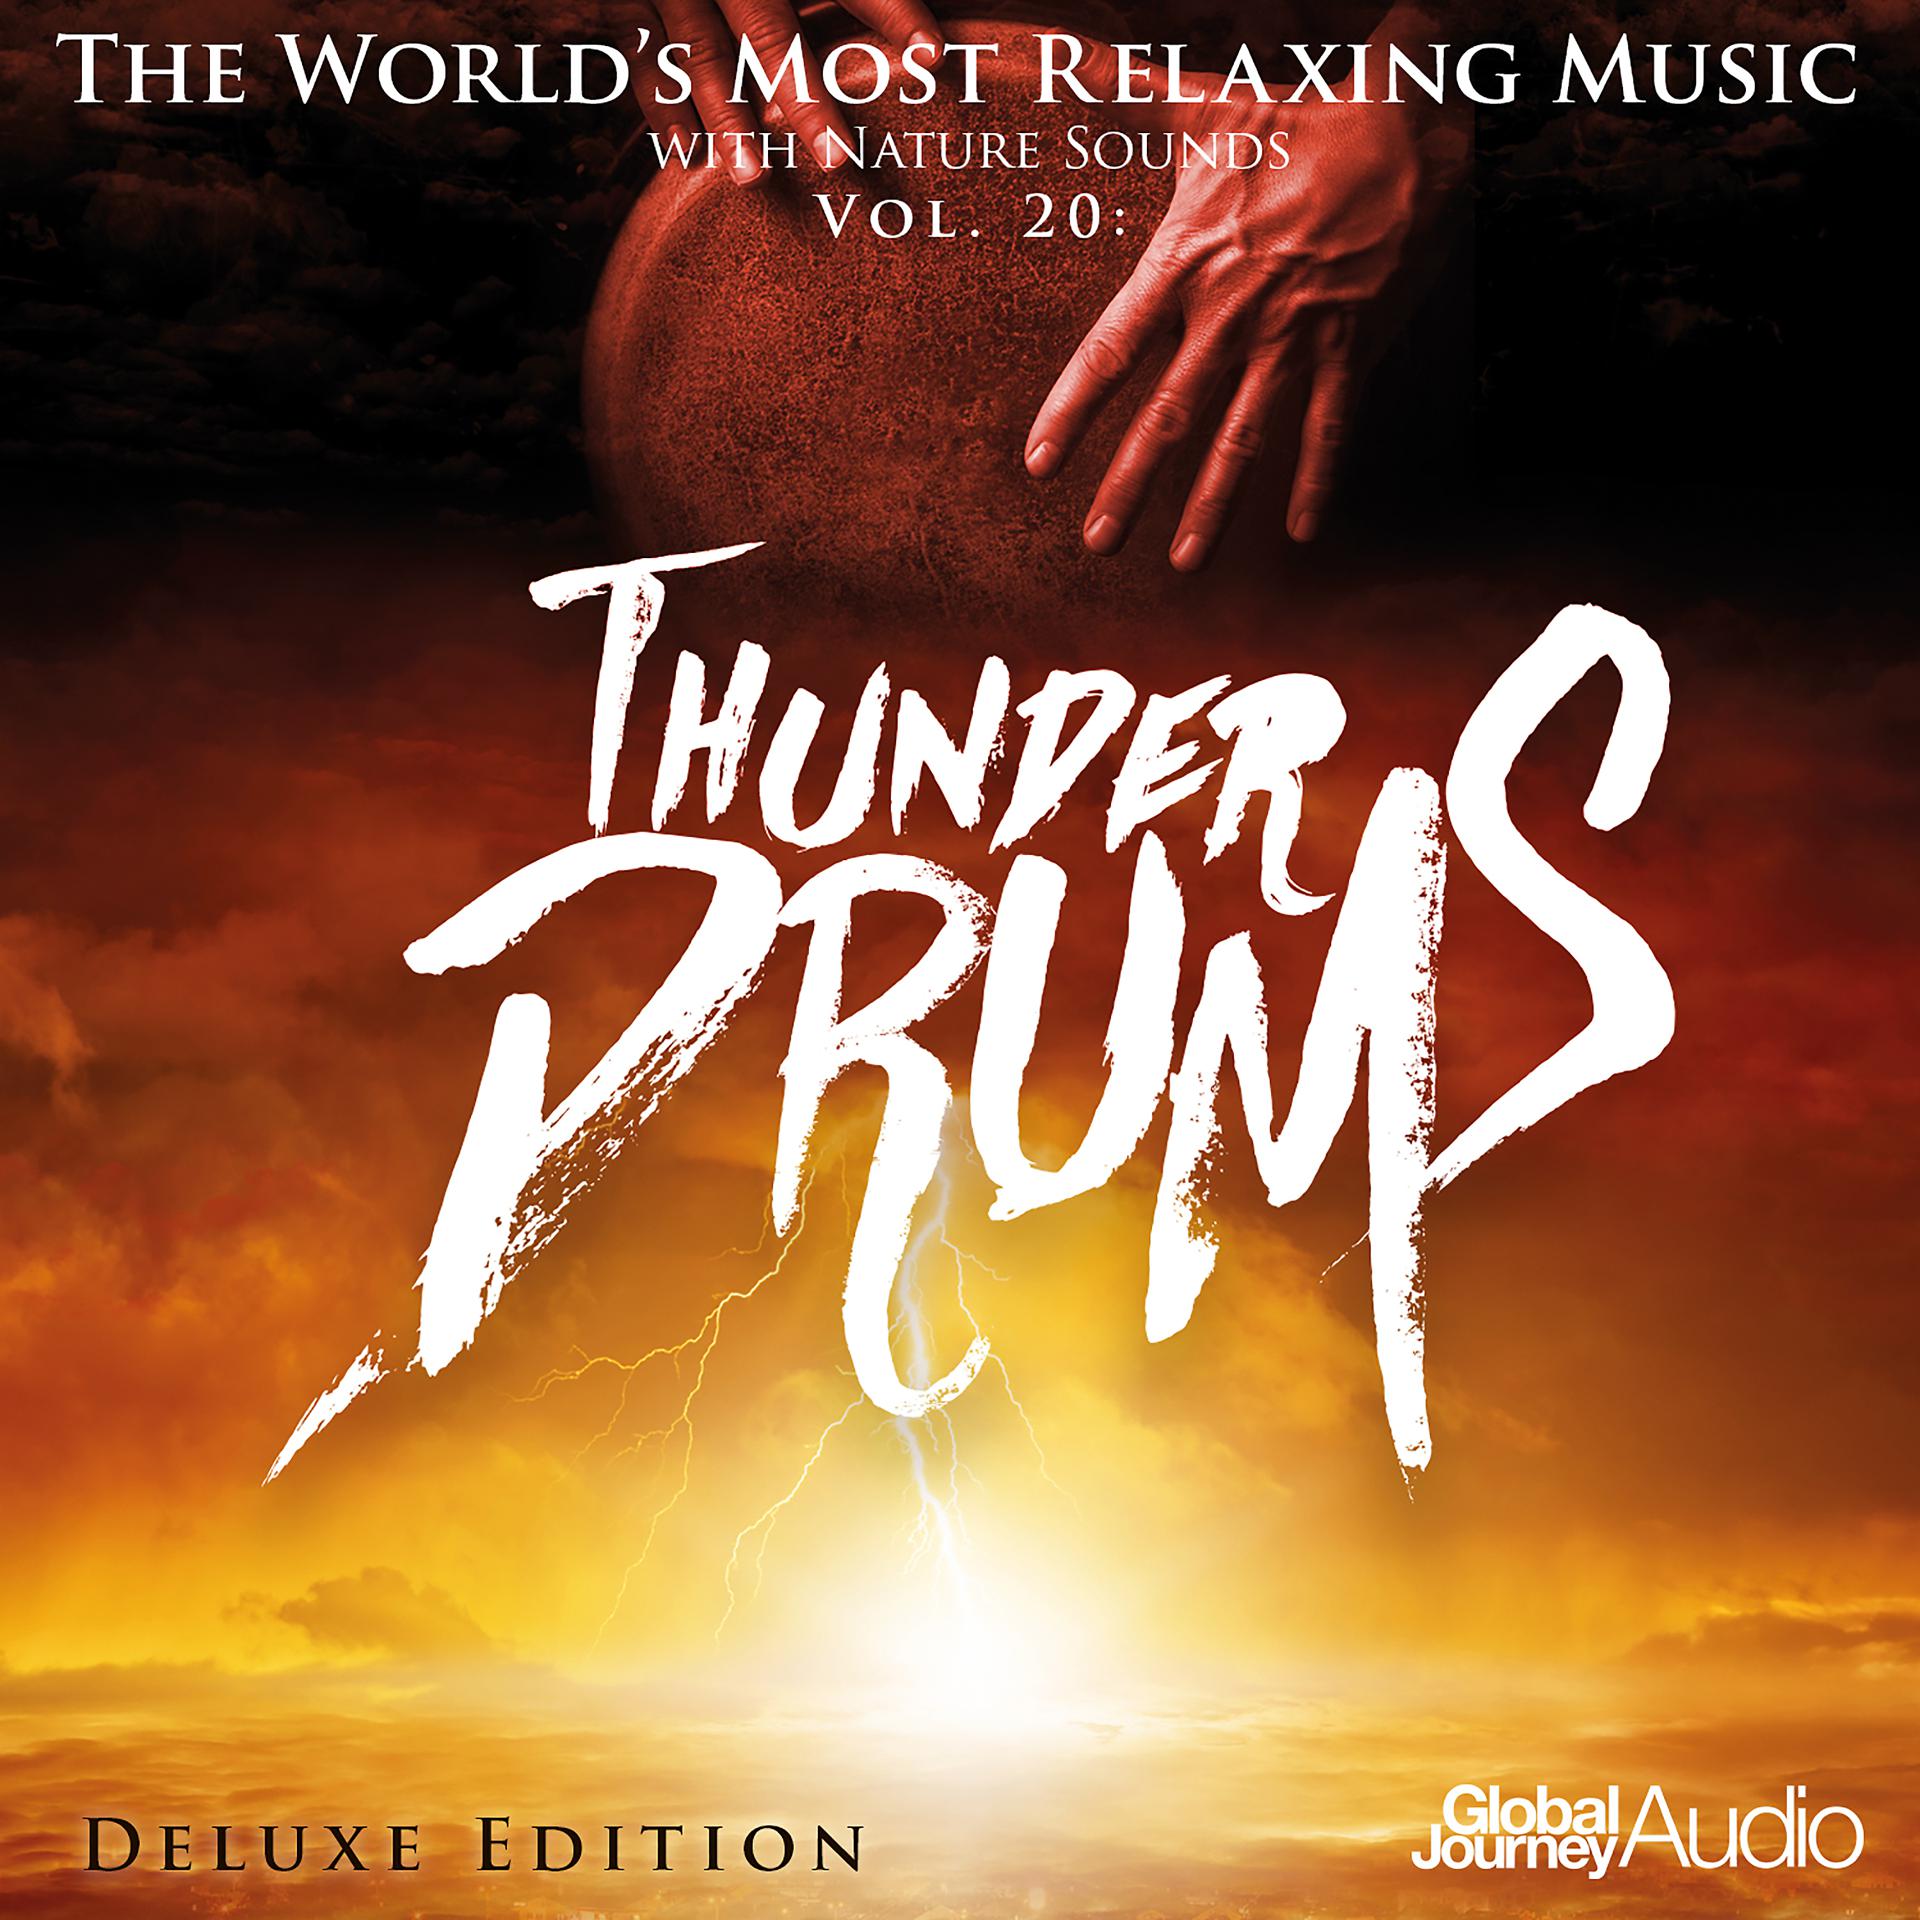 Постер альбома The World's Most Relaxing Music with Nature Sounds, Vol.20: Thunder Drums (Deluxe Edition)